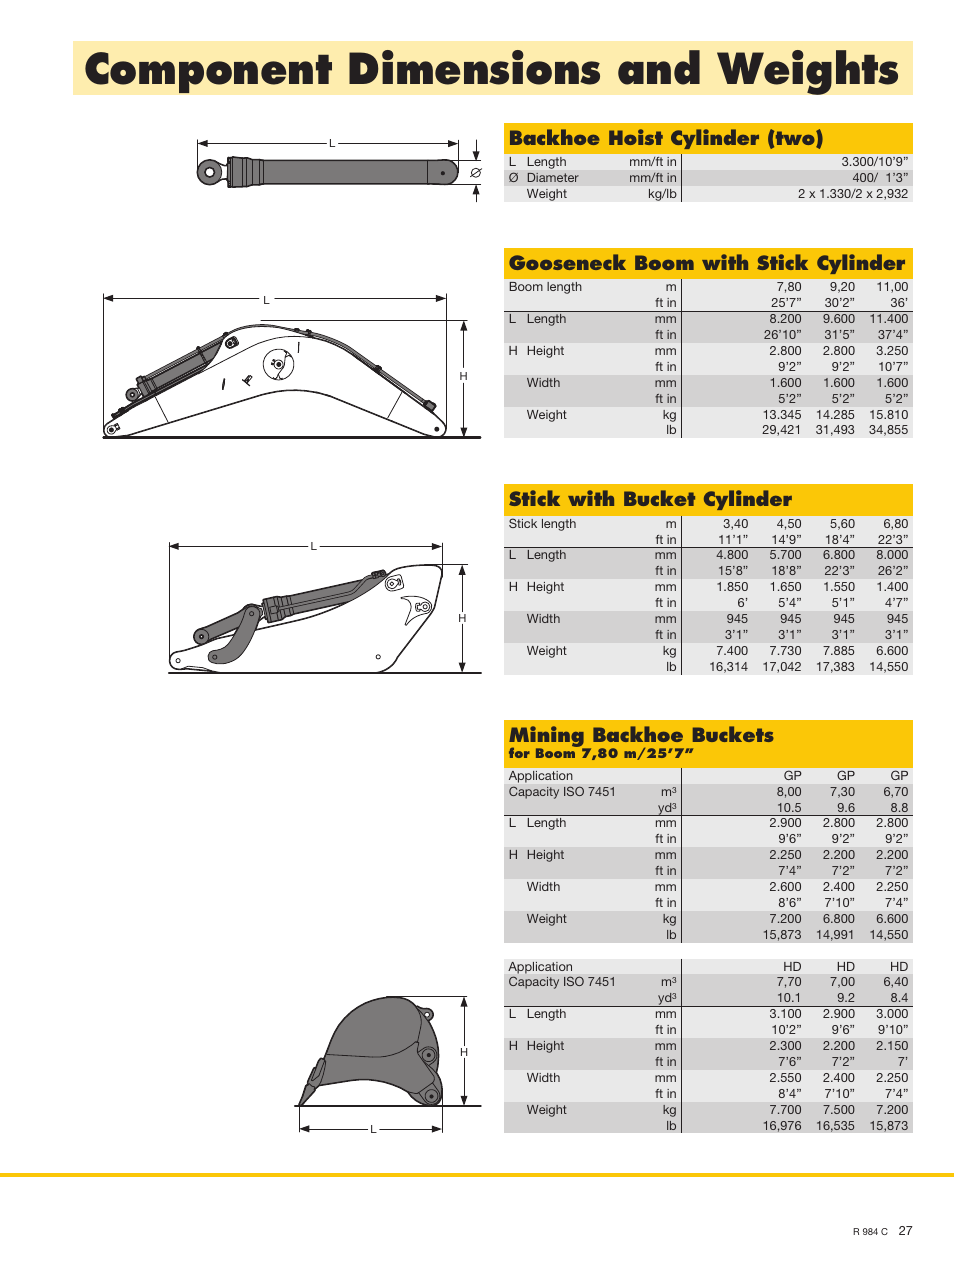 Component dimensions and weights, Backhoe hoist cylinder (two), Gooseneck  boom with stick cylinder | Liebherr R 984 C User Manual | Page 27 / 30 |  Original mode